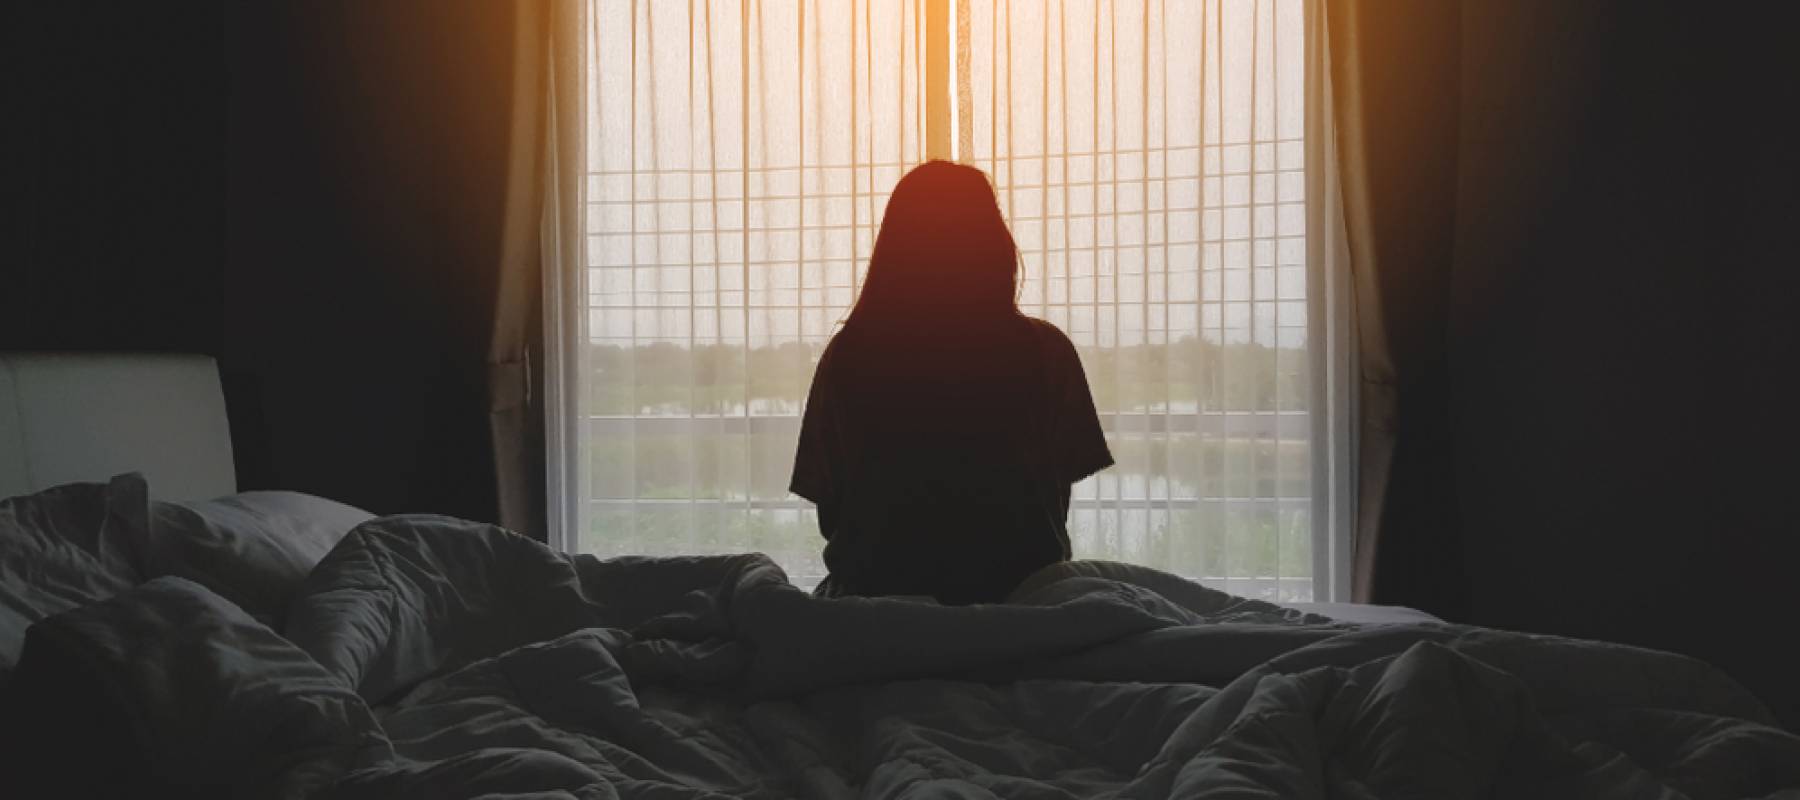 a lonely woman with her back to the camera, sitting on her bed and looking out the window